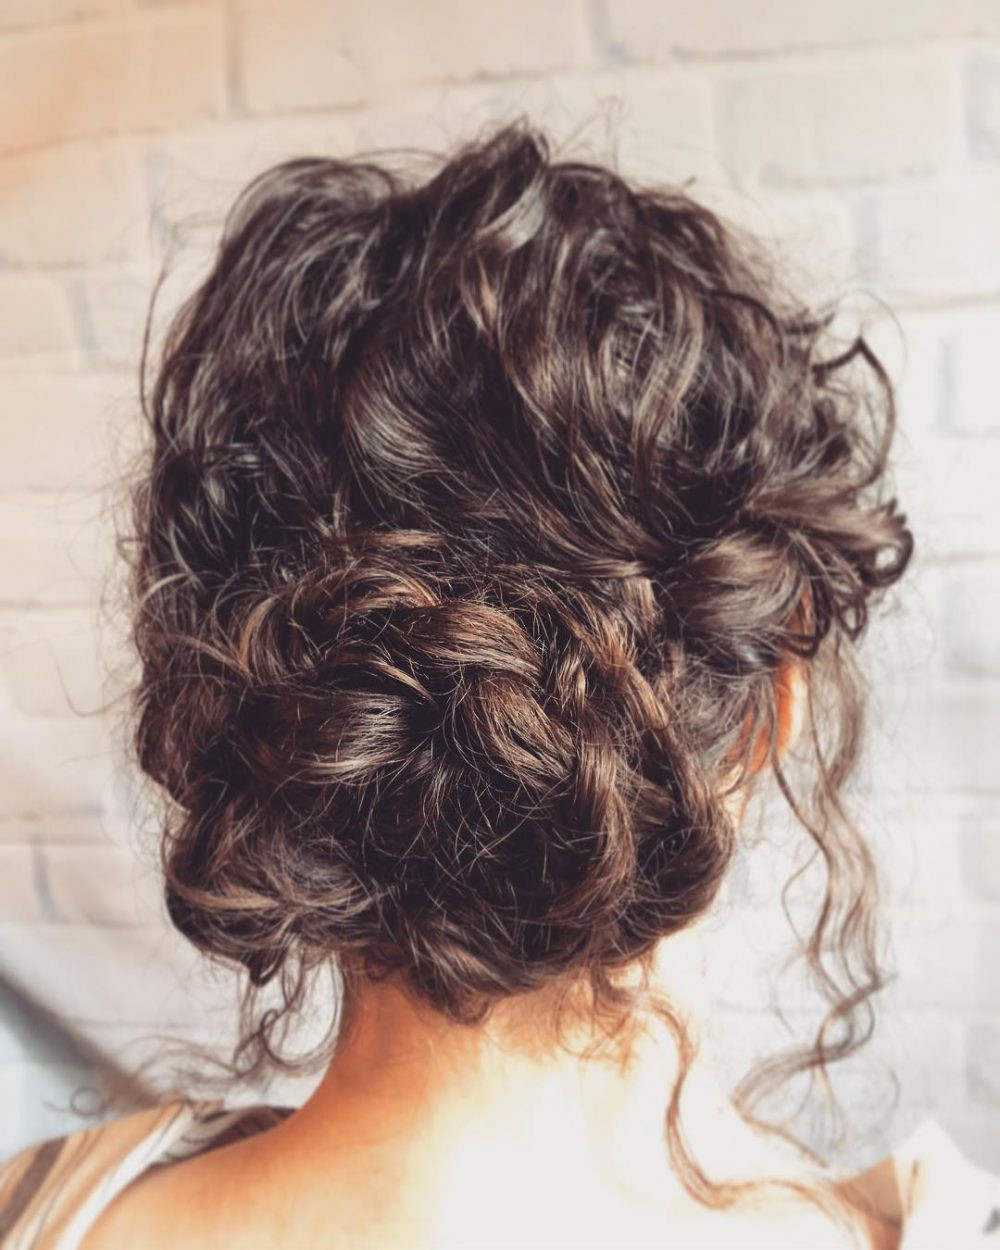 Curly Updos Prom Hairstyles
 18 Stunning Curly Prom Hairstyles for 2019 Updos Down